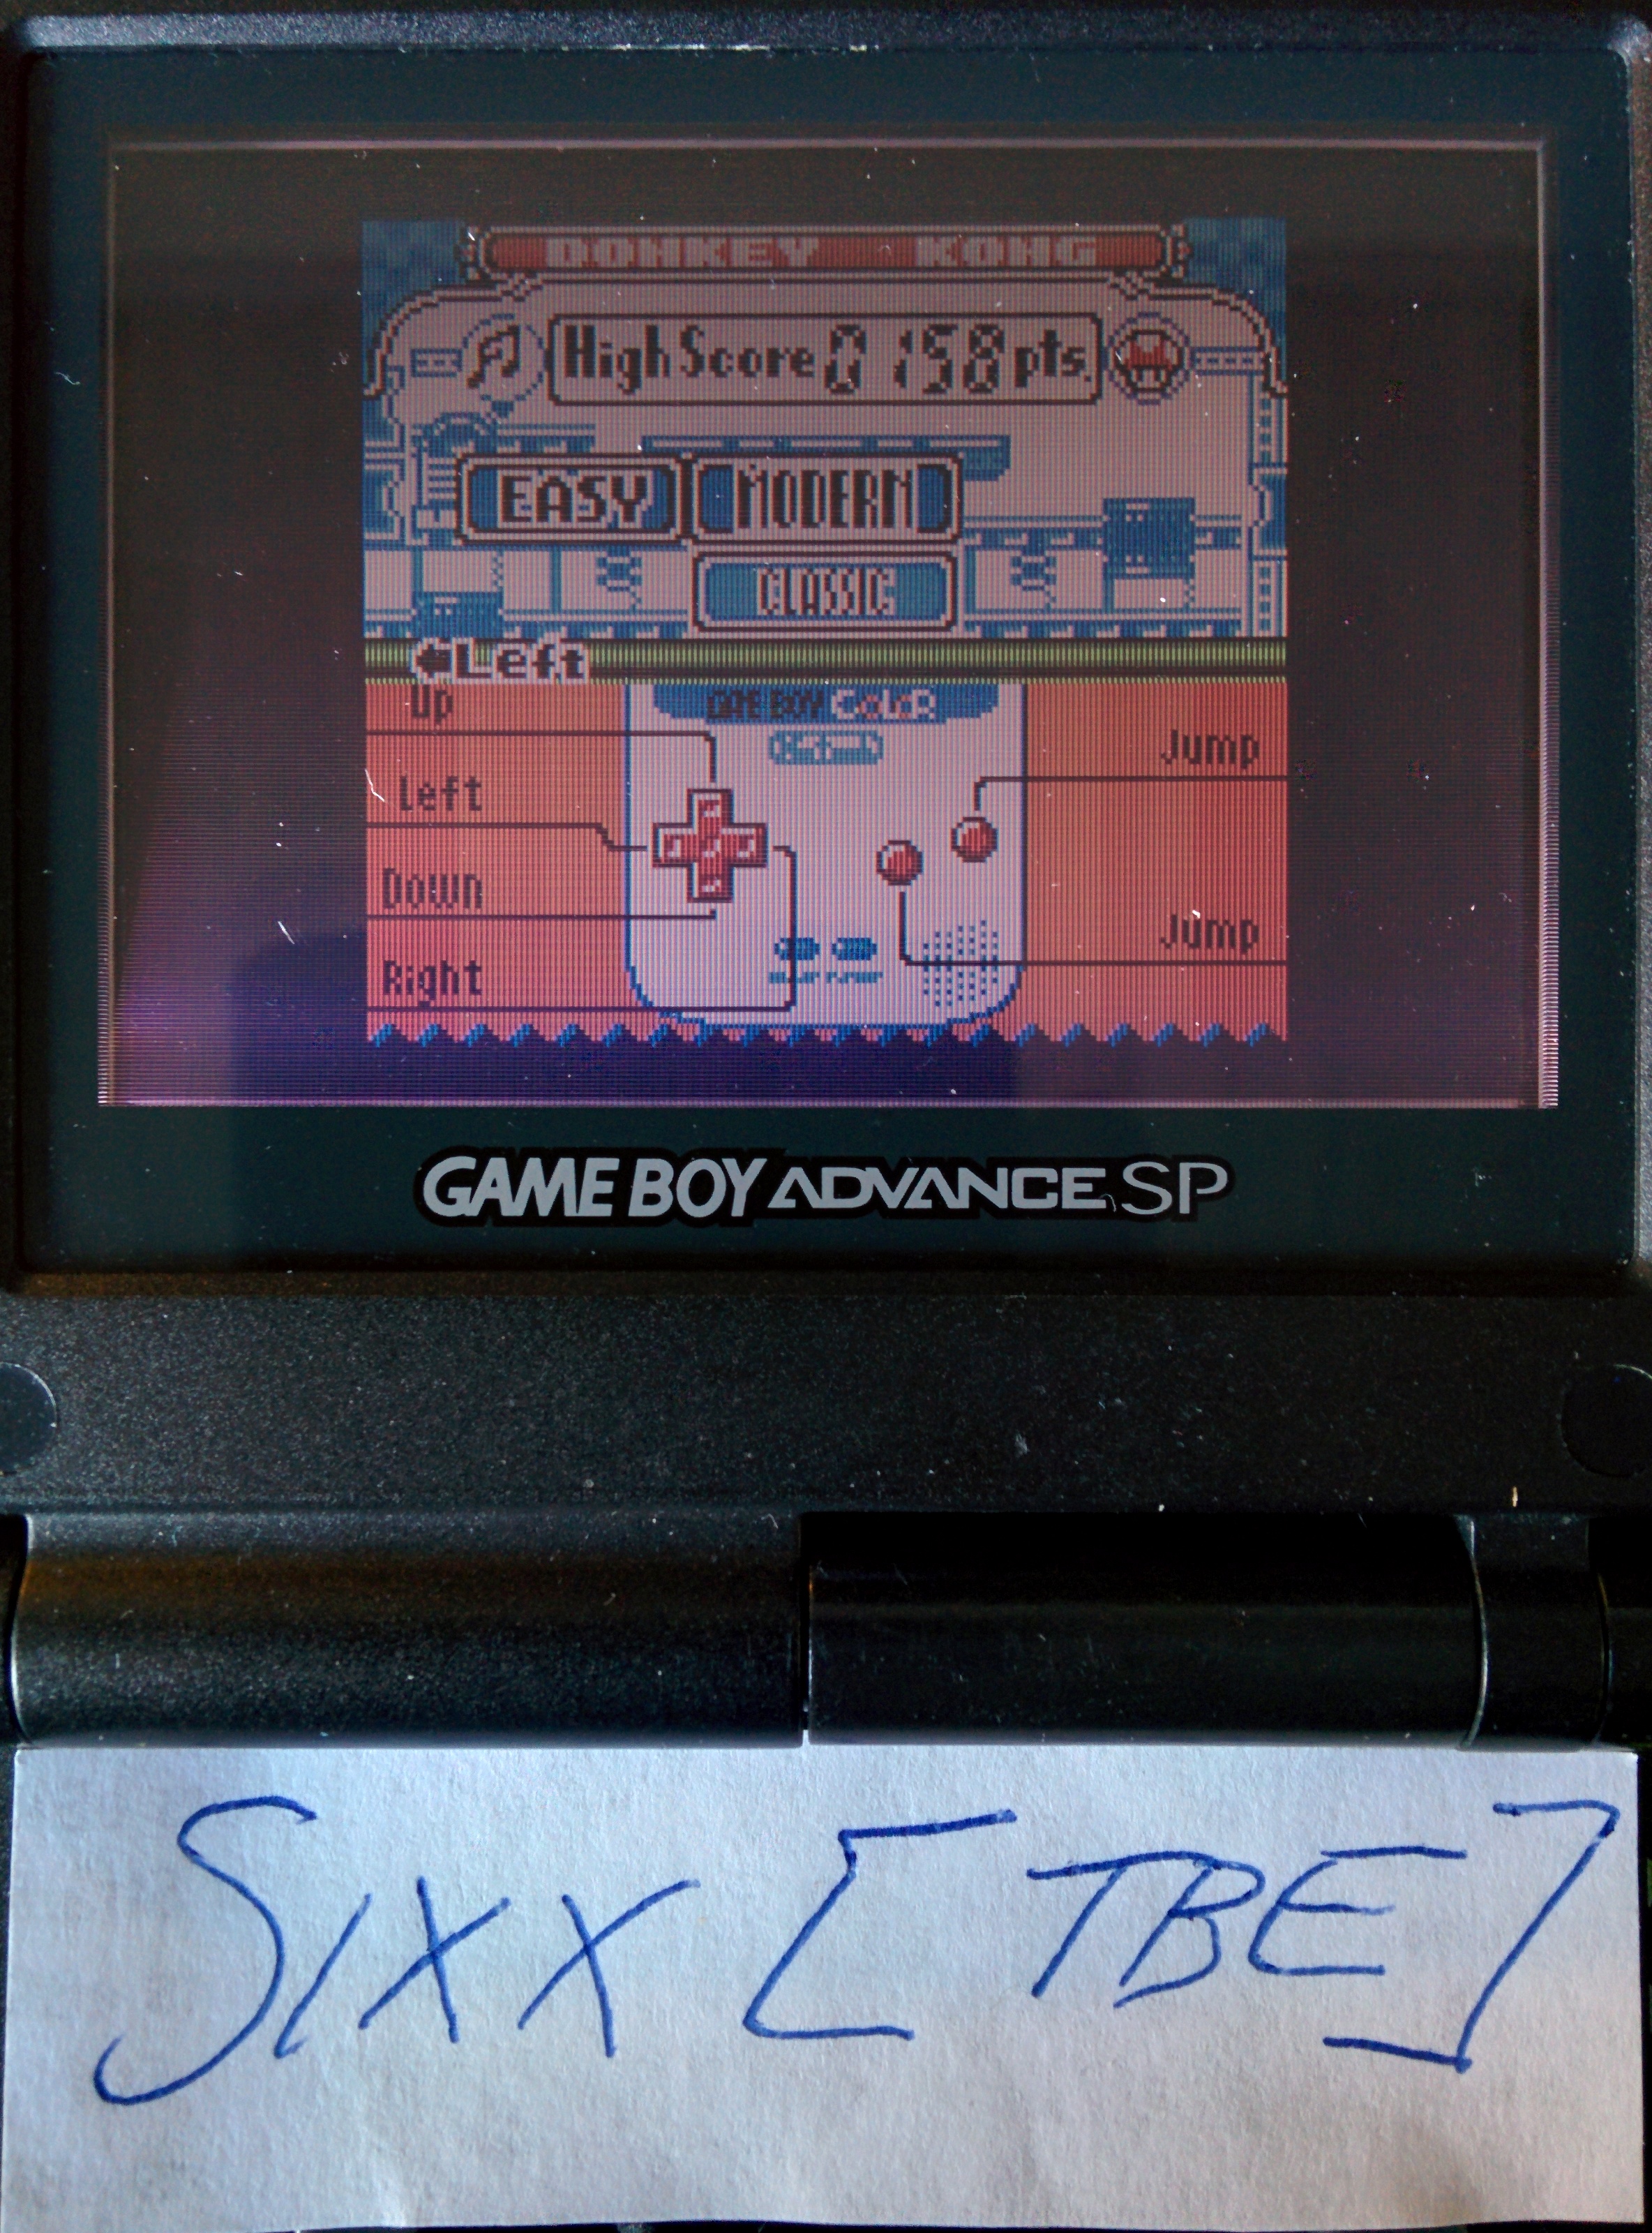 Sixx: Game & Watch Gallery 2: Donkey Kong: Modern: Easy (Game Boy Color) 158 points on 2014-08-25 02:22:00